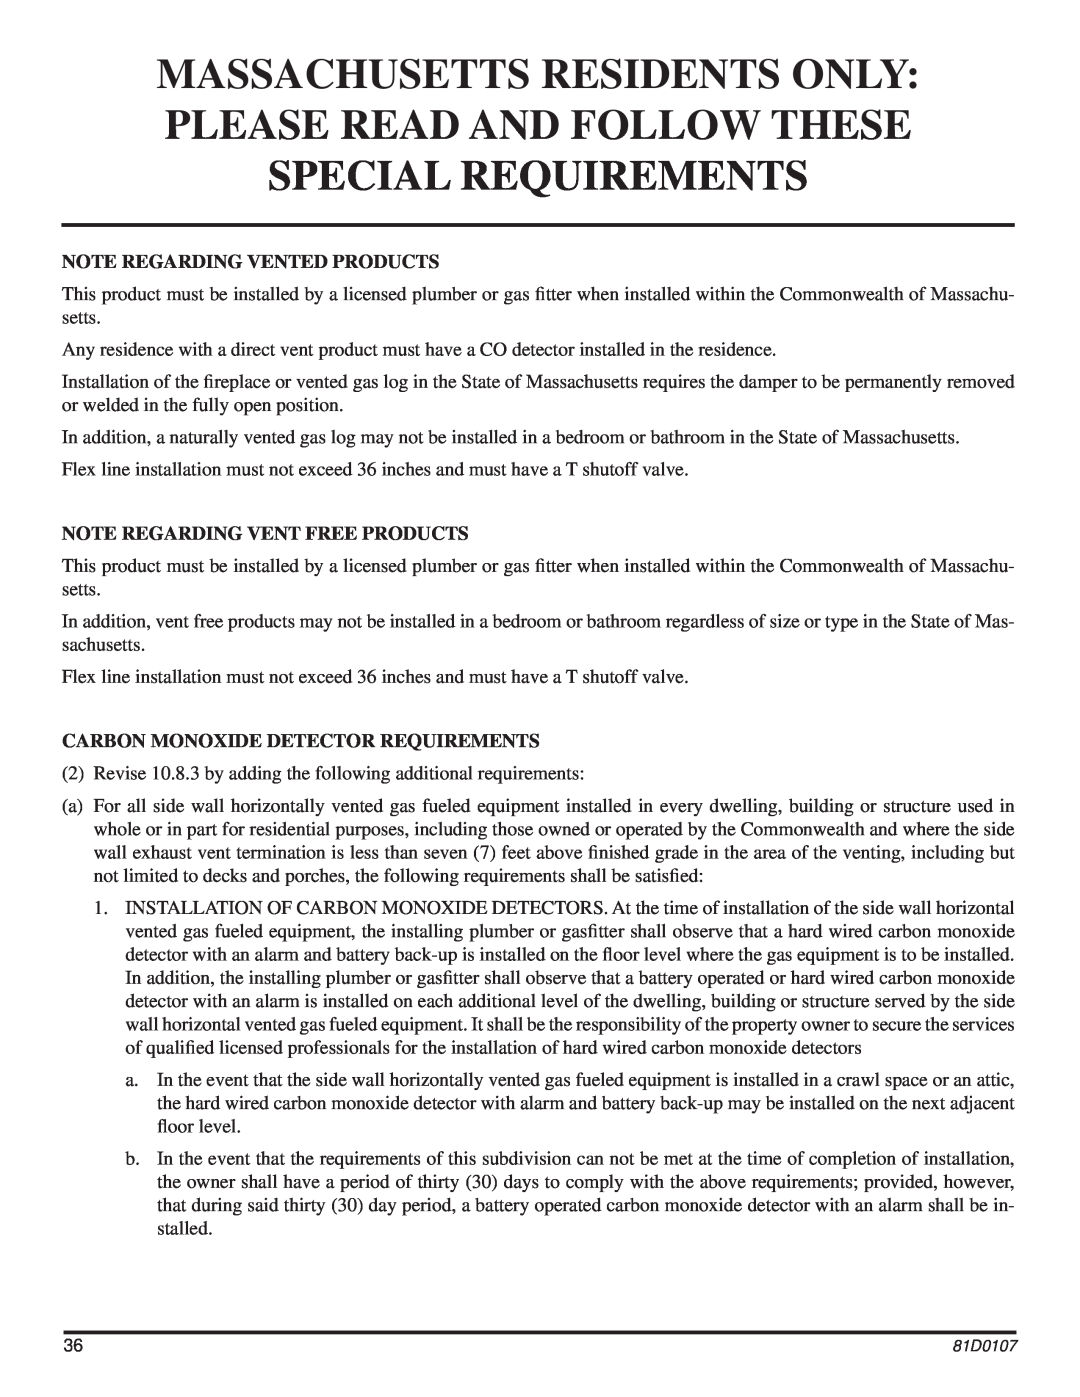 Monessen Hearth NB24, NB18 operating instructions Note Regarding Vented Products, Note Regarding Vent Free Products 